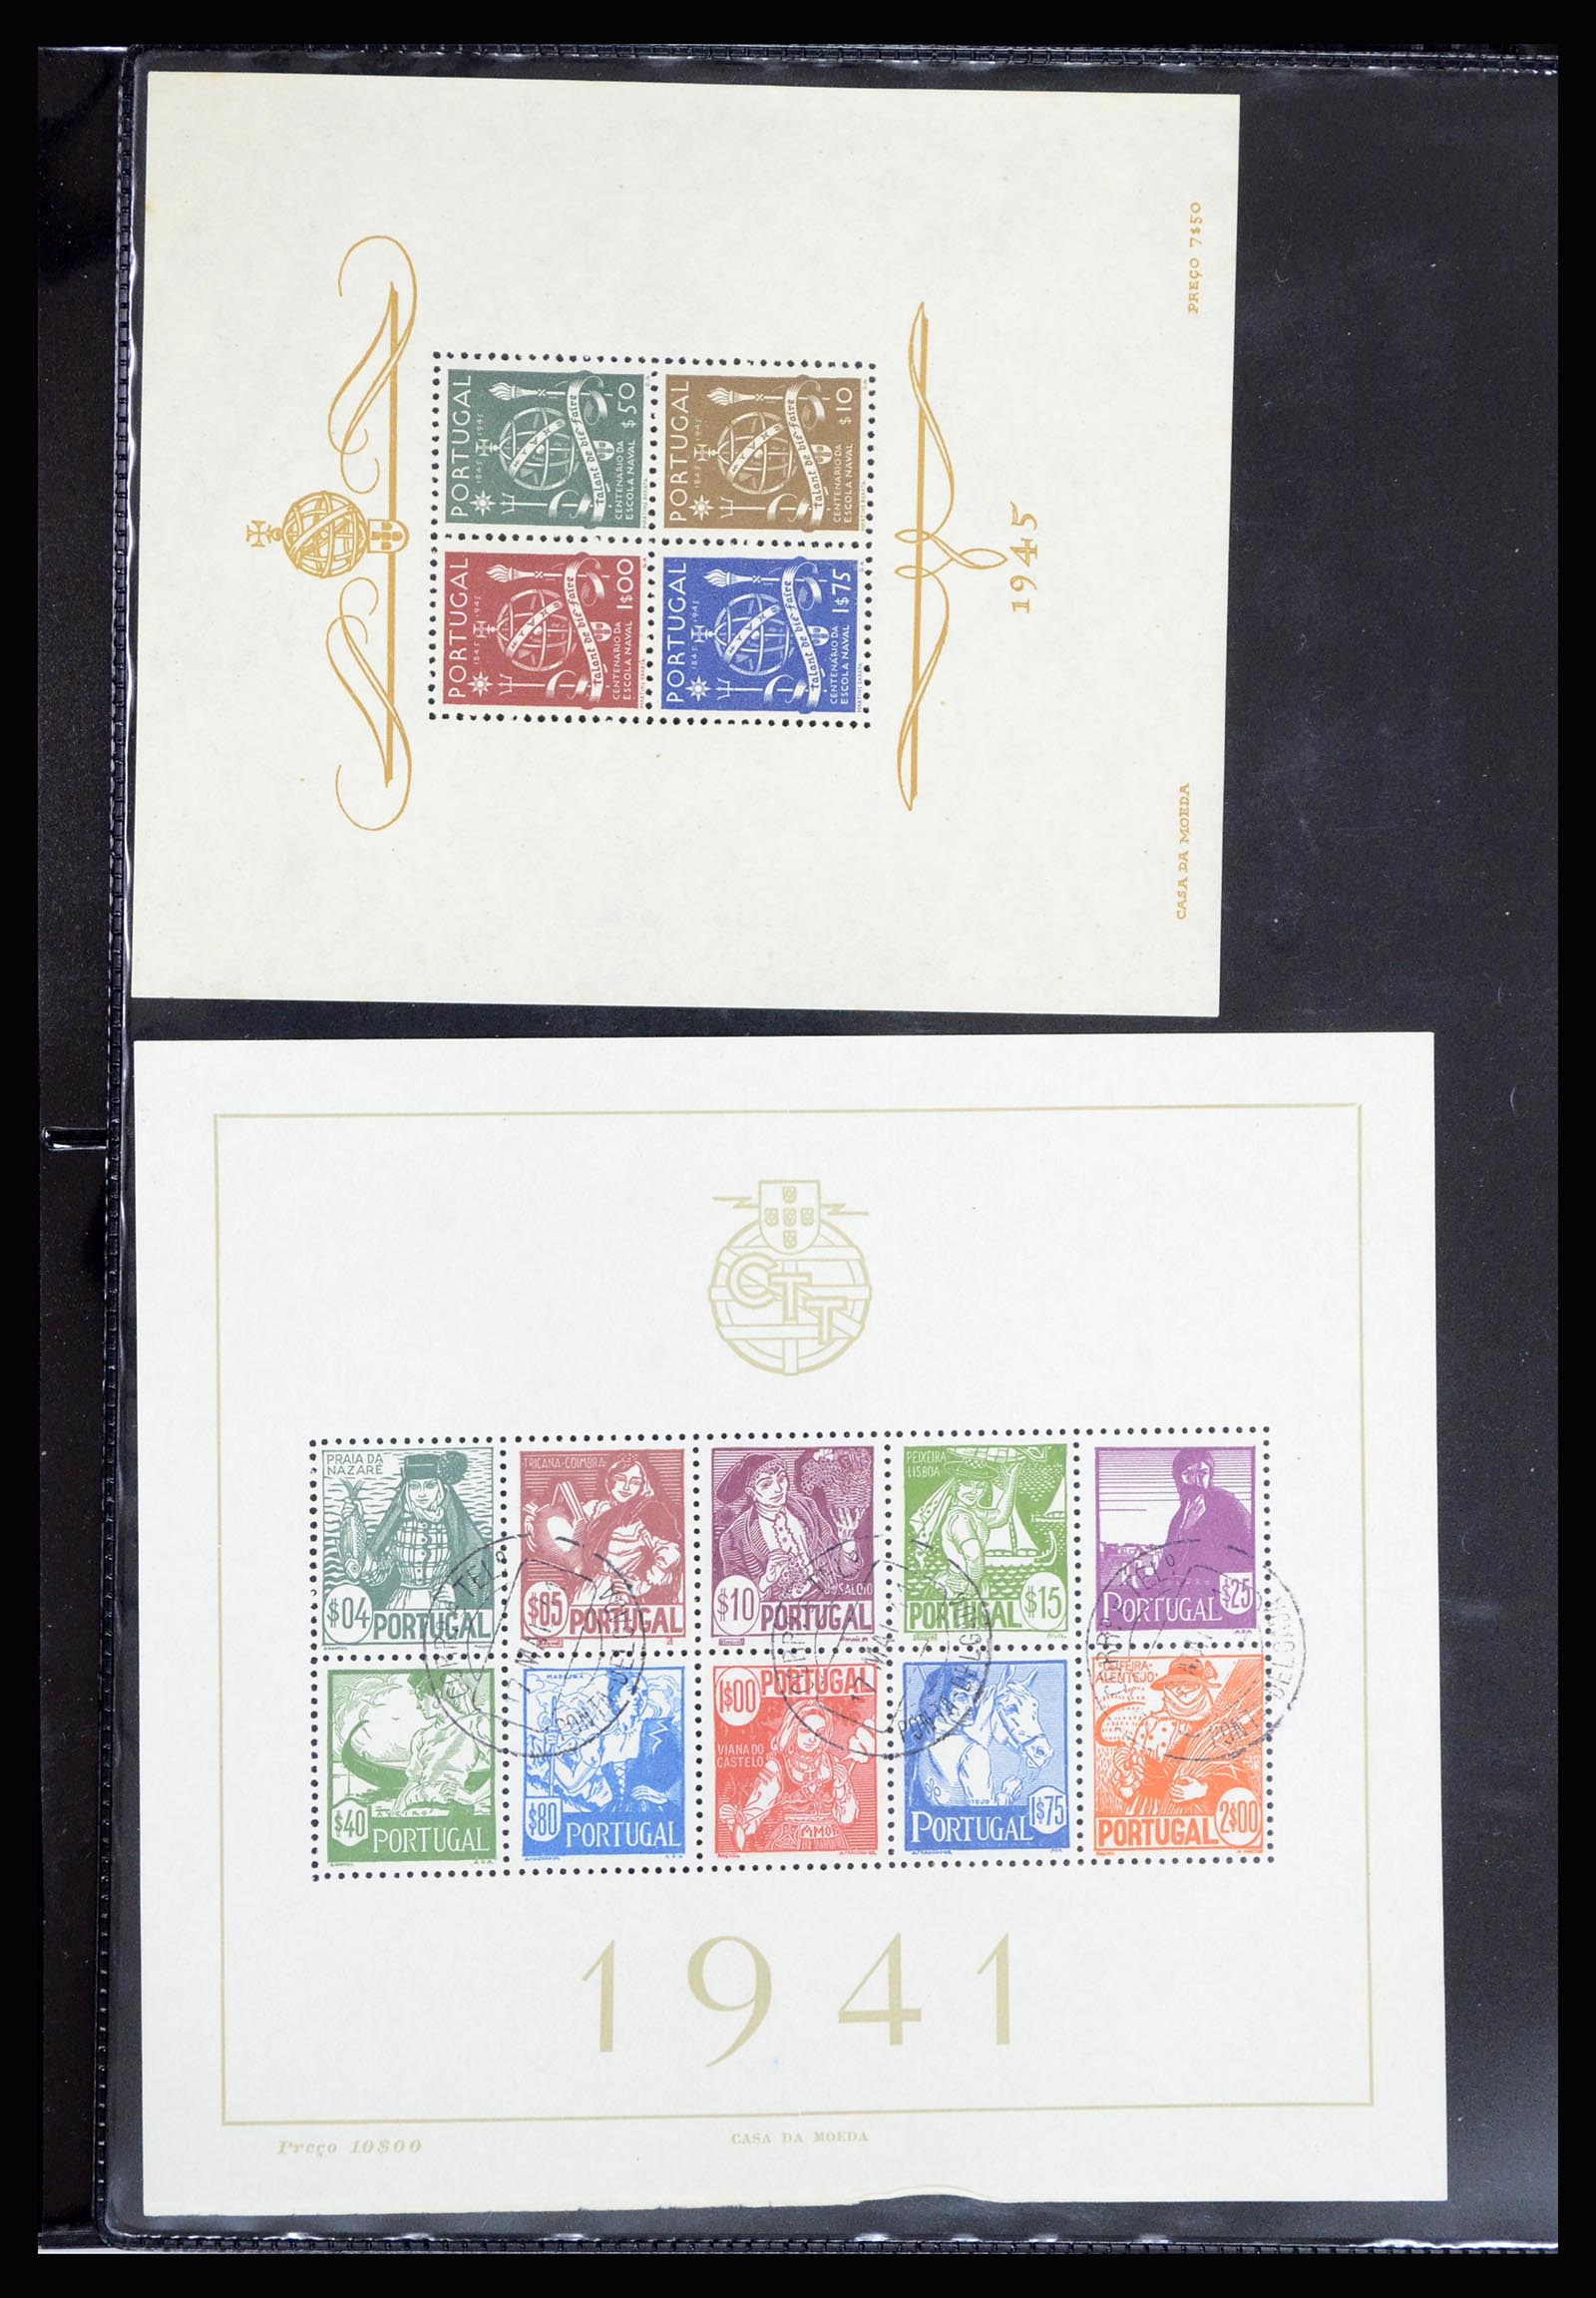 36924 002 - Stamp collection 36924 Portugal souvenir sheets 1940-1949.